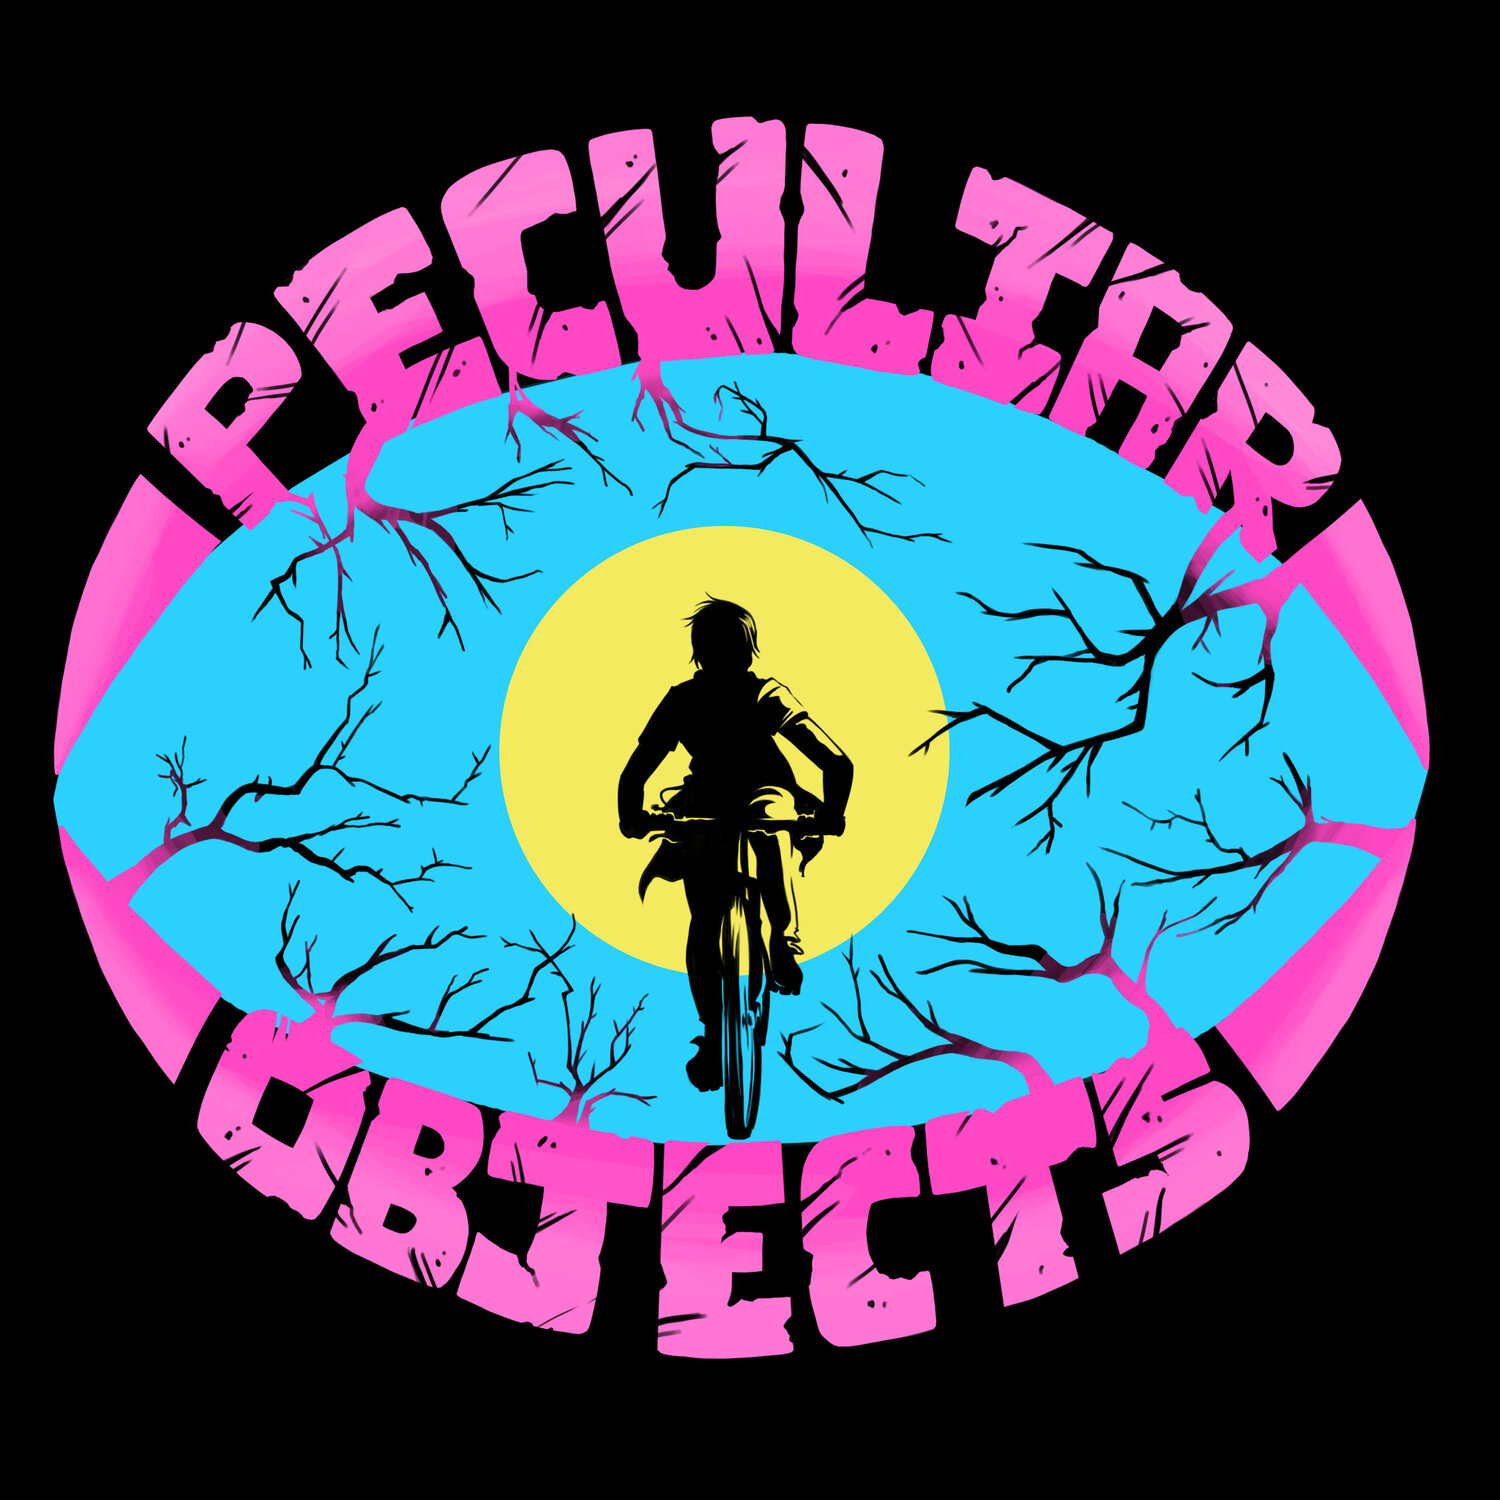 Peculiar Objects